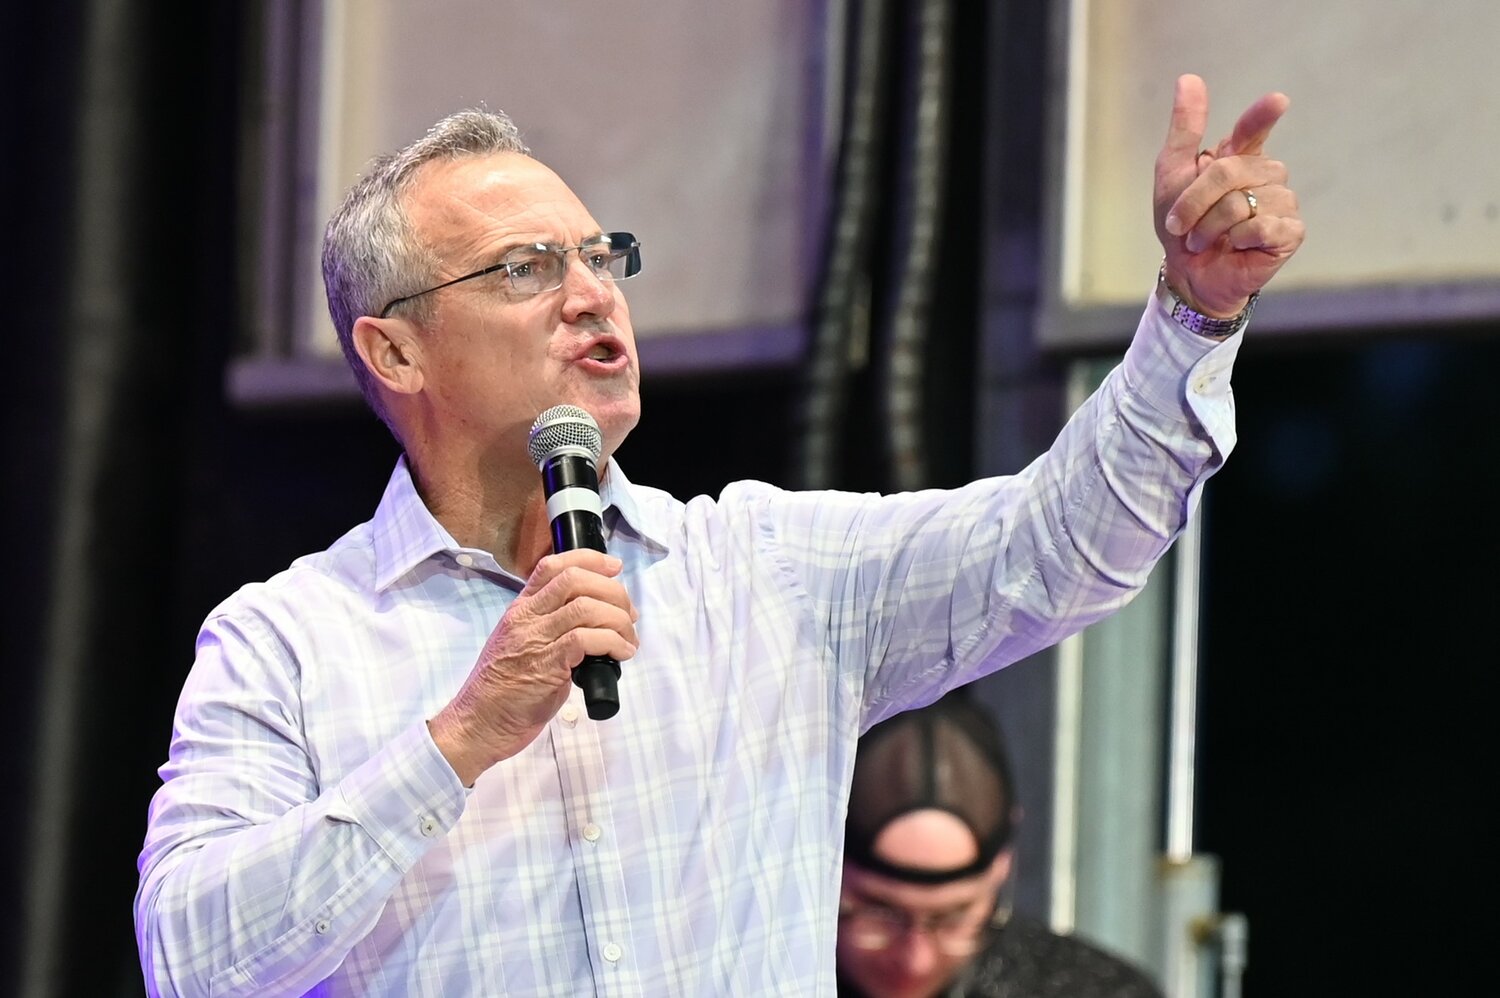 Evangelist Rick Gage, shown here preaching at a crusade in Georgia, has seen thousands of people make commitments to Christ in 2023. (Index/Roger Alford)